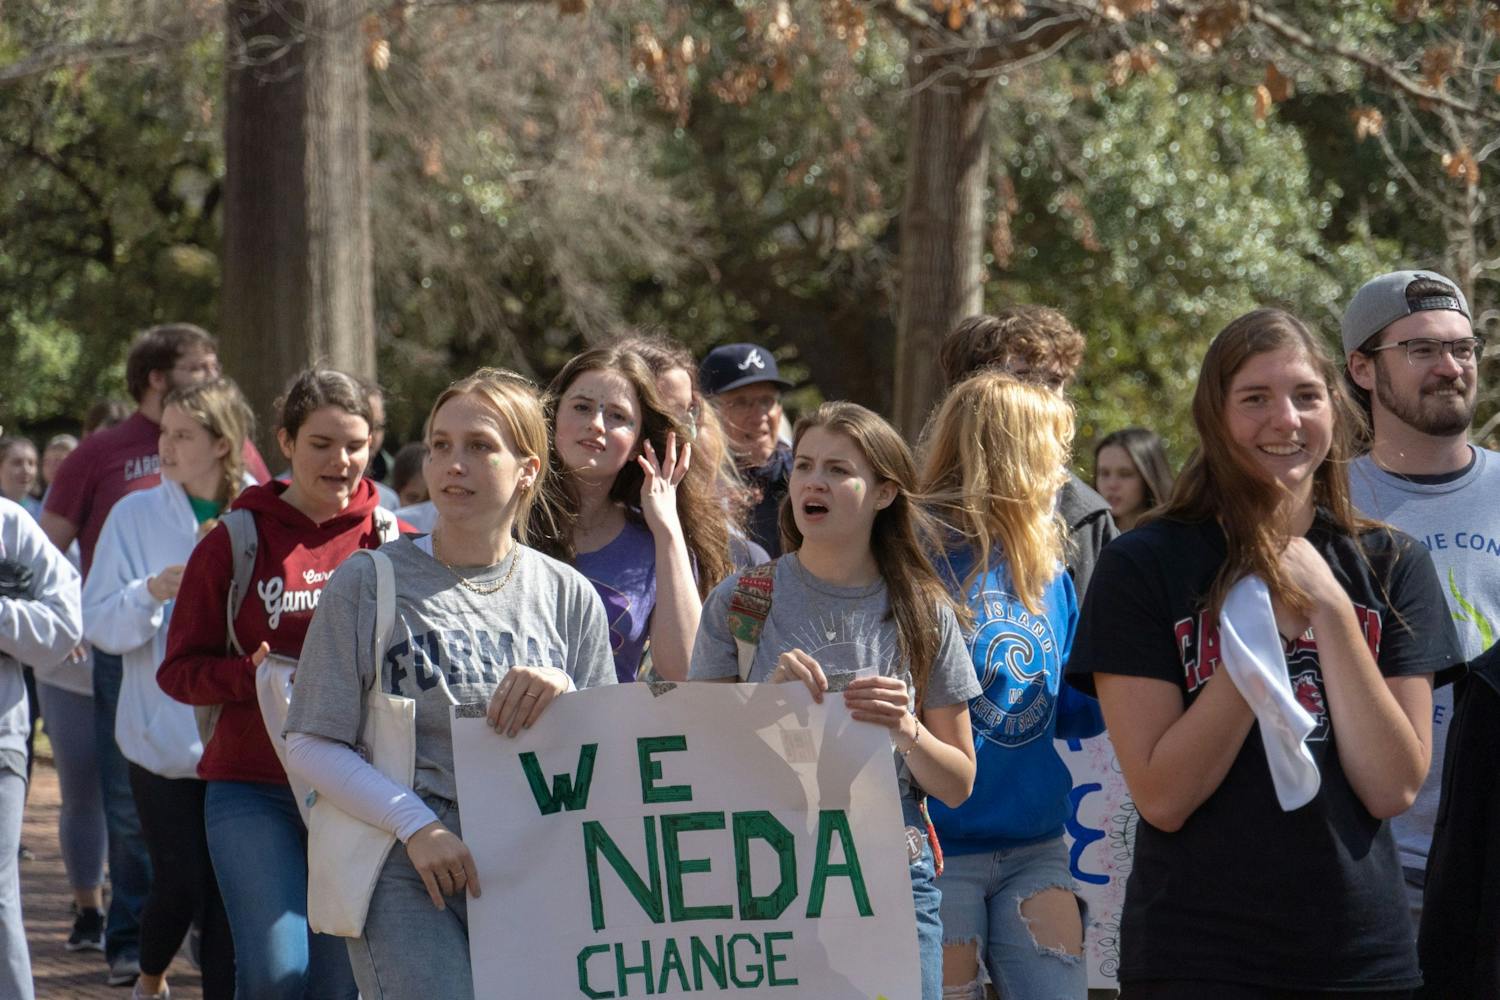 Community members and supporters of NEDA walk across 鶹С򽴫ý's campus on Feb. 26, 2022.The NEDA Walk took place as a charity event raise support, money, and awareness for those who effected by eating disorders.